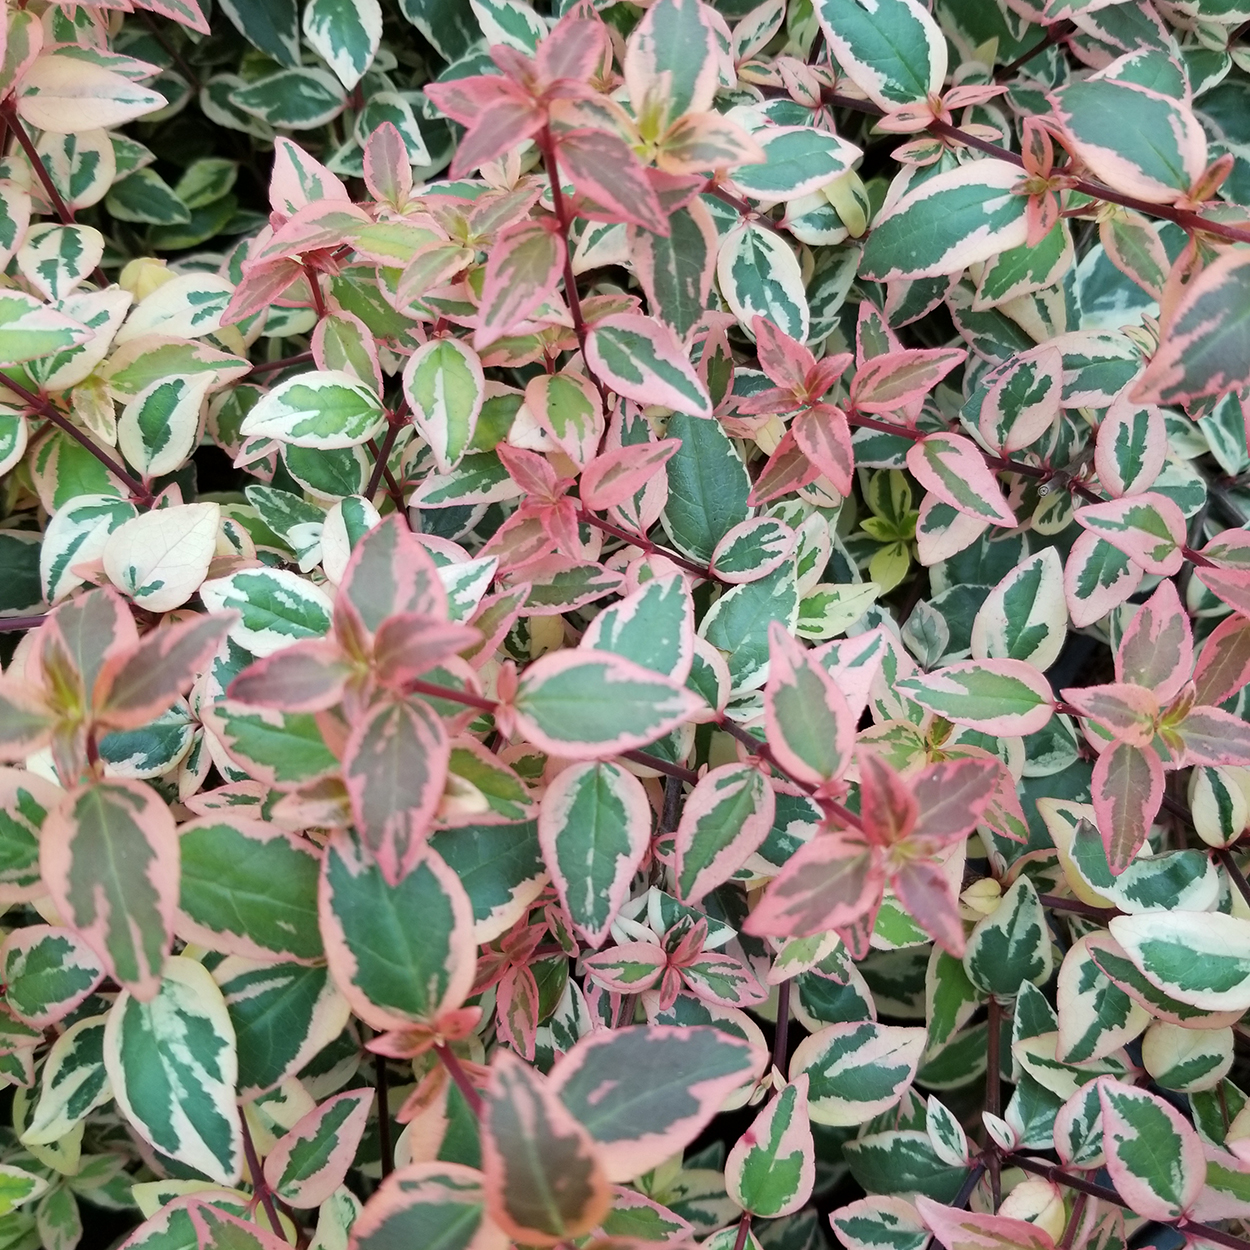 The variegated foliage of Tres Amigos abelia showing pink tones.